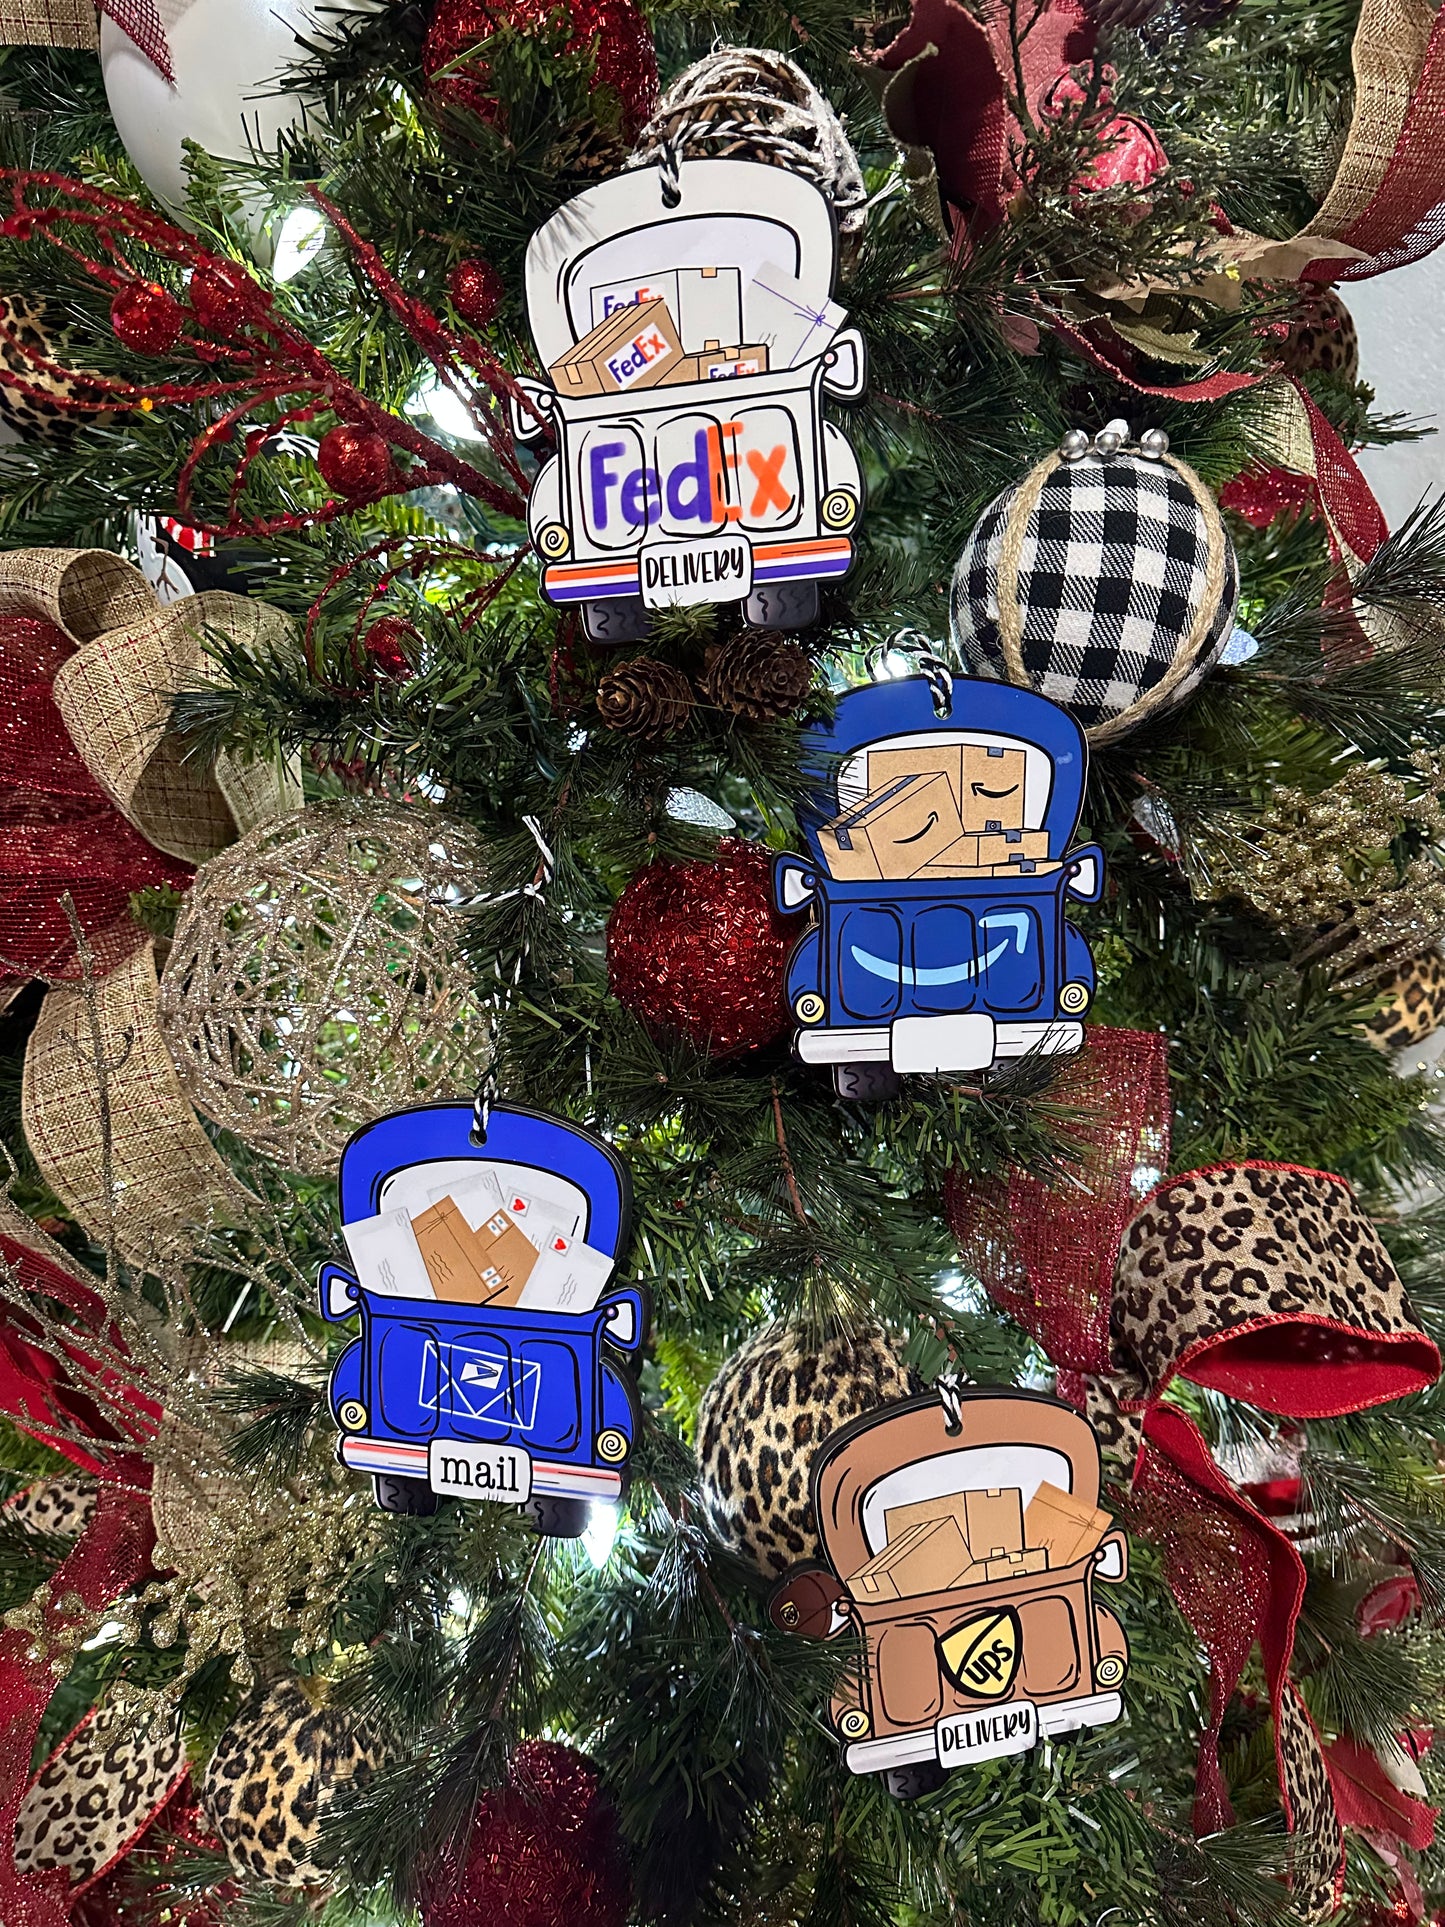 Delivery Driver Ornaments